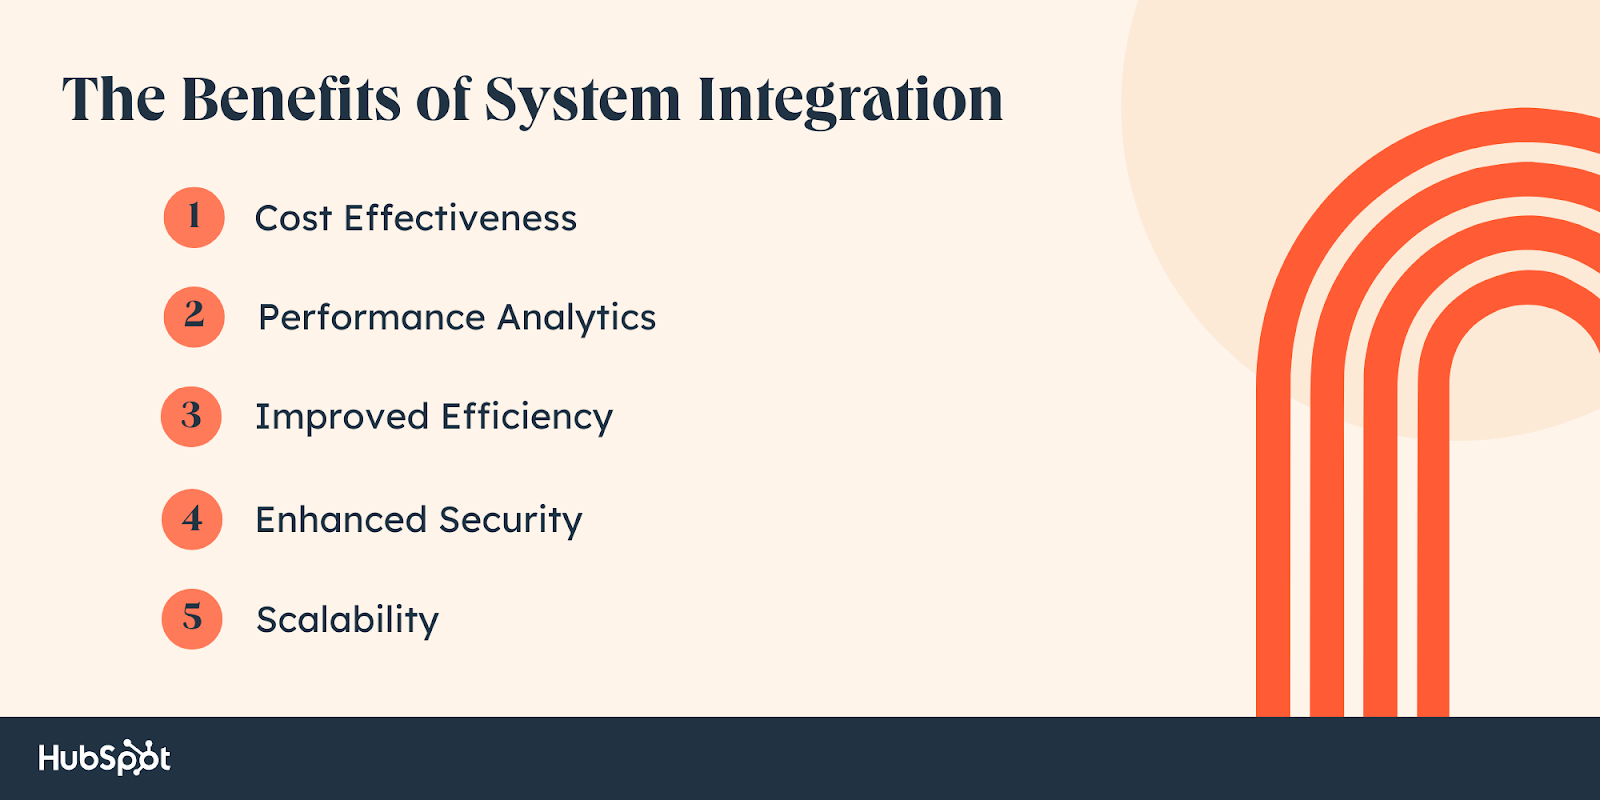 The Benefits of System Integration. Cost Effectiveness. Performance Analytics. Improved Efficiency. Enhanced Security. Scalability.